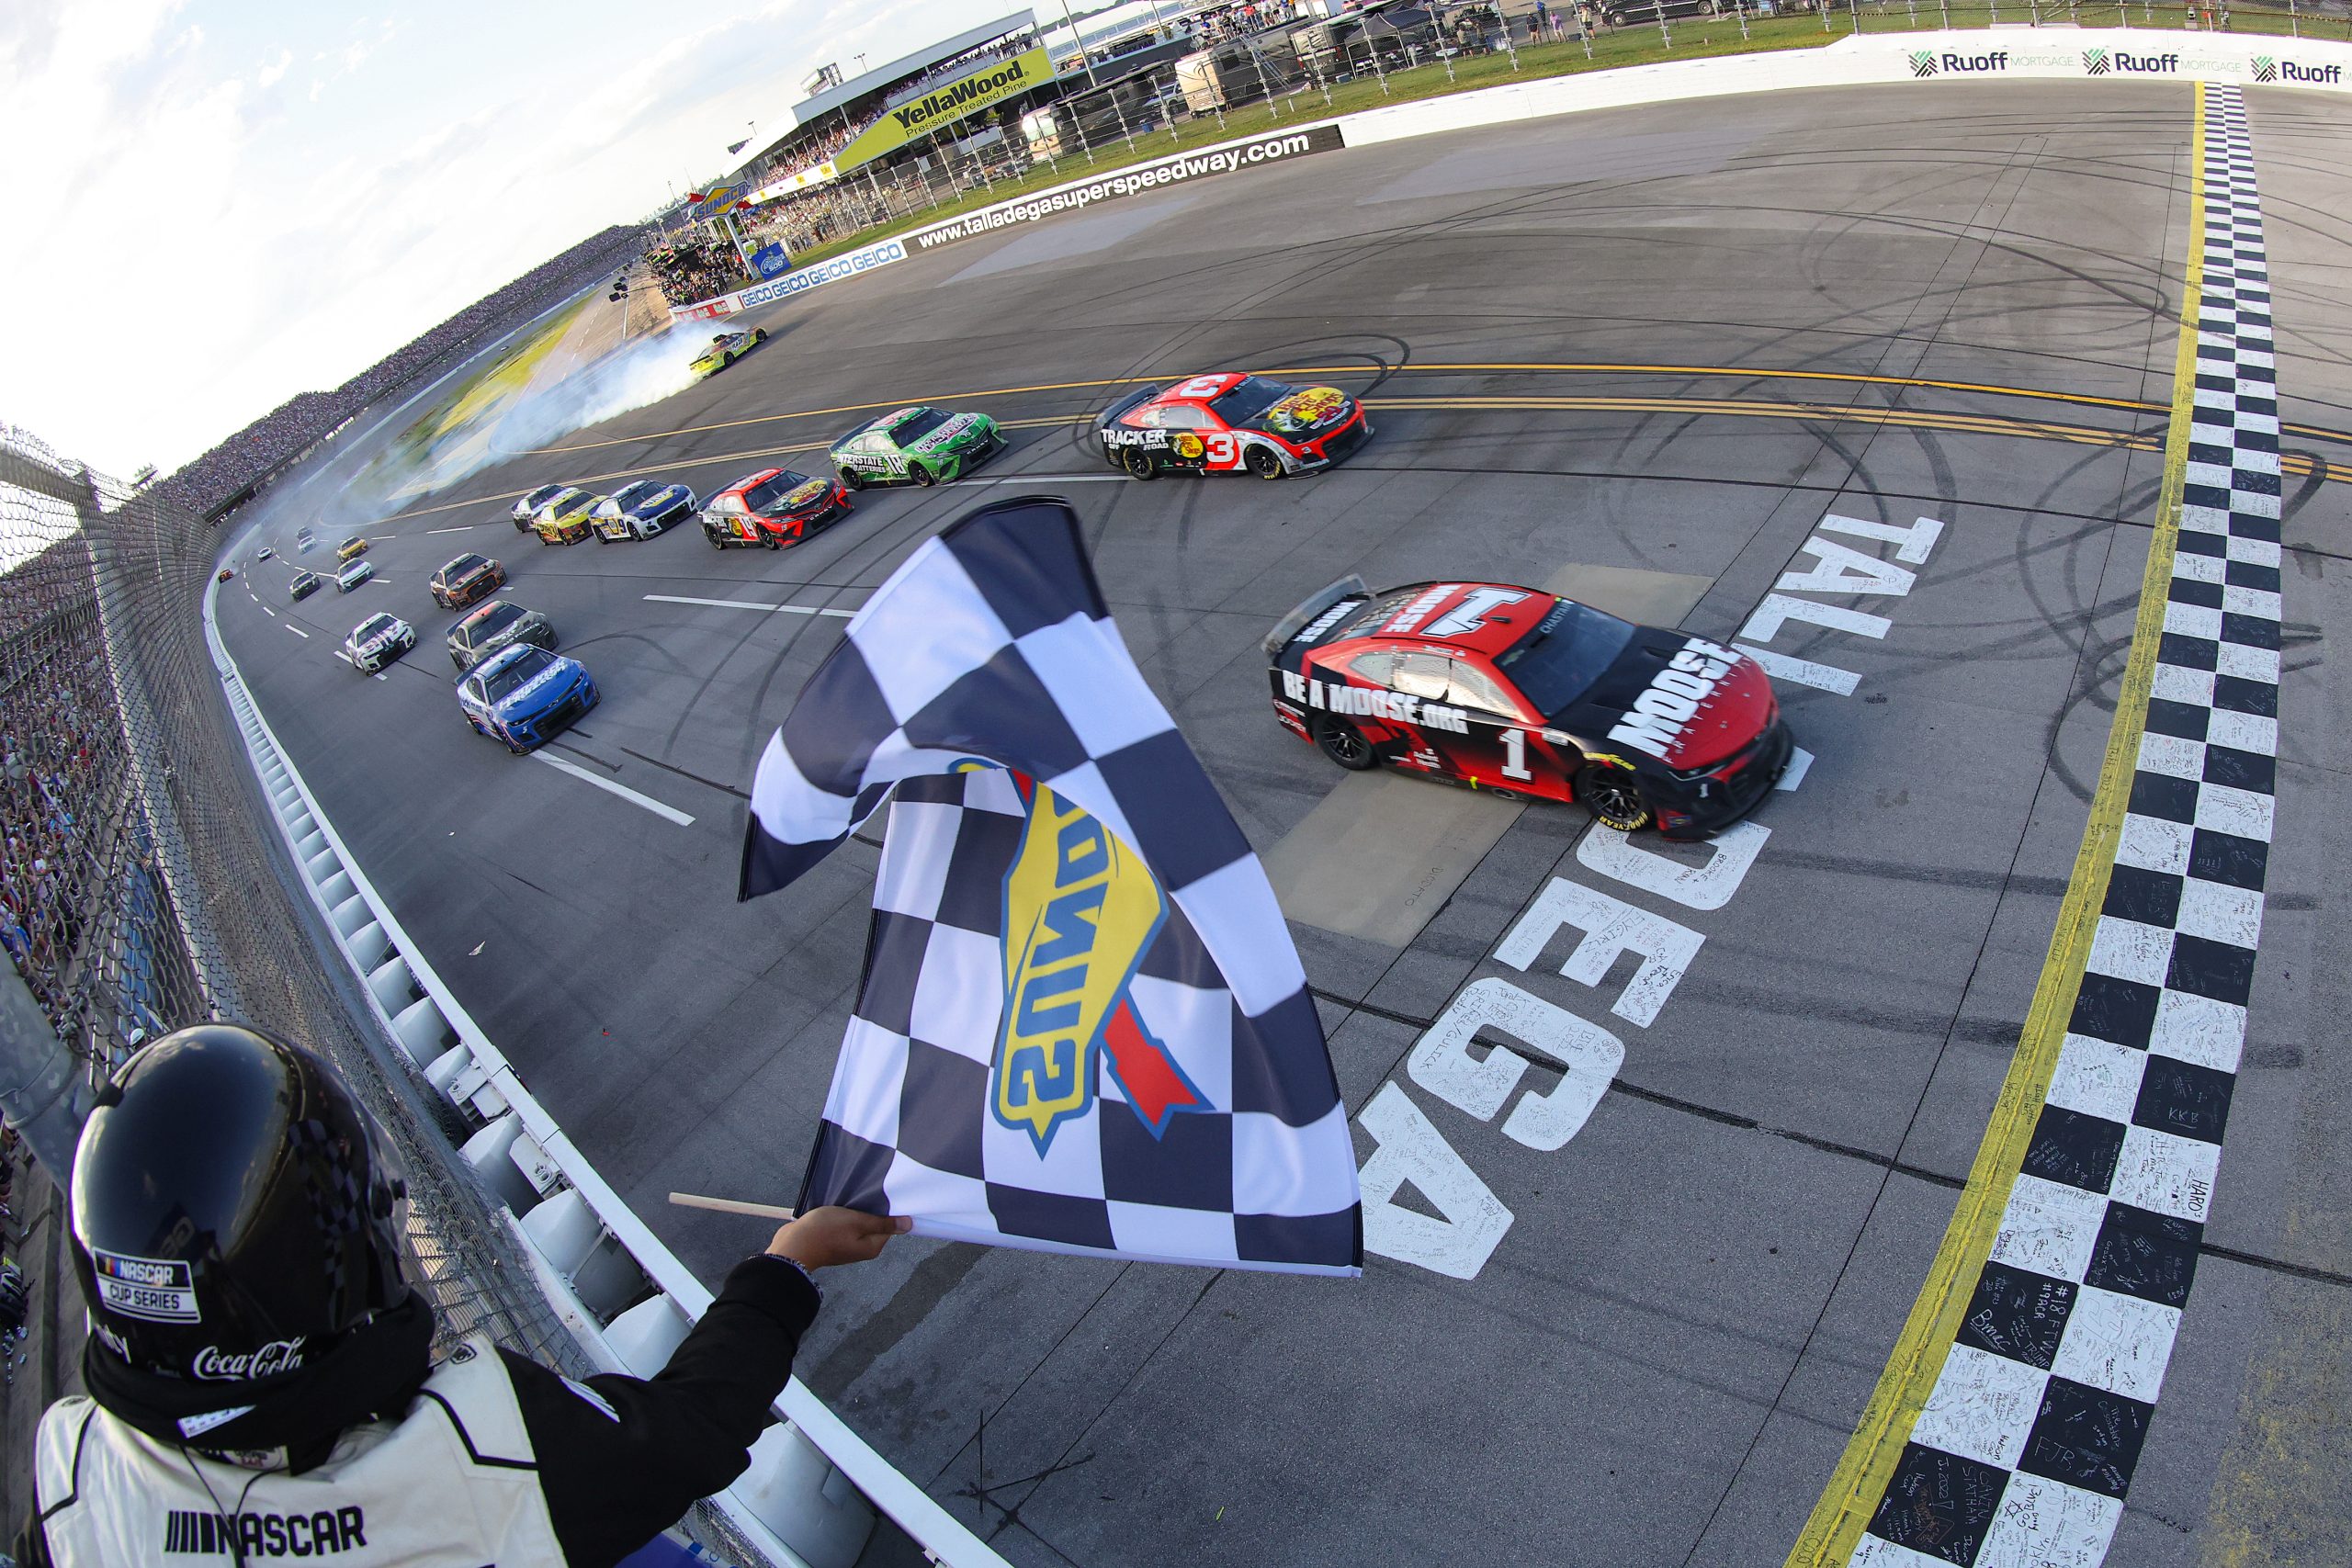 Credit: TALLADEGA, ALABAMA - APRIL 24: Ross Chastain, driver of the #1 Moose Fraternity Chevrolet, takes the checkered flag to win the NASCAR Cup Series GEICO 500 at Talladega Superspeedway on April 24, 2022 in Talladega, Alabama. (Photo by James Gilbert/Getty Images)